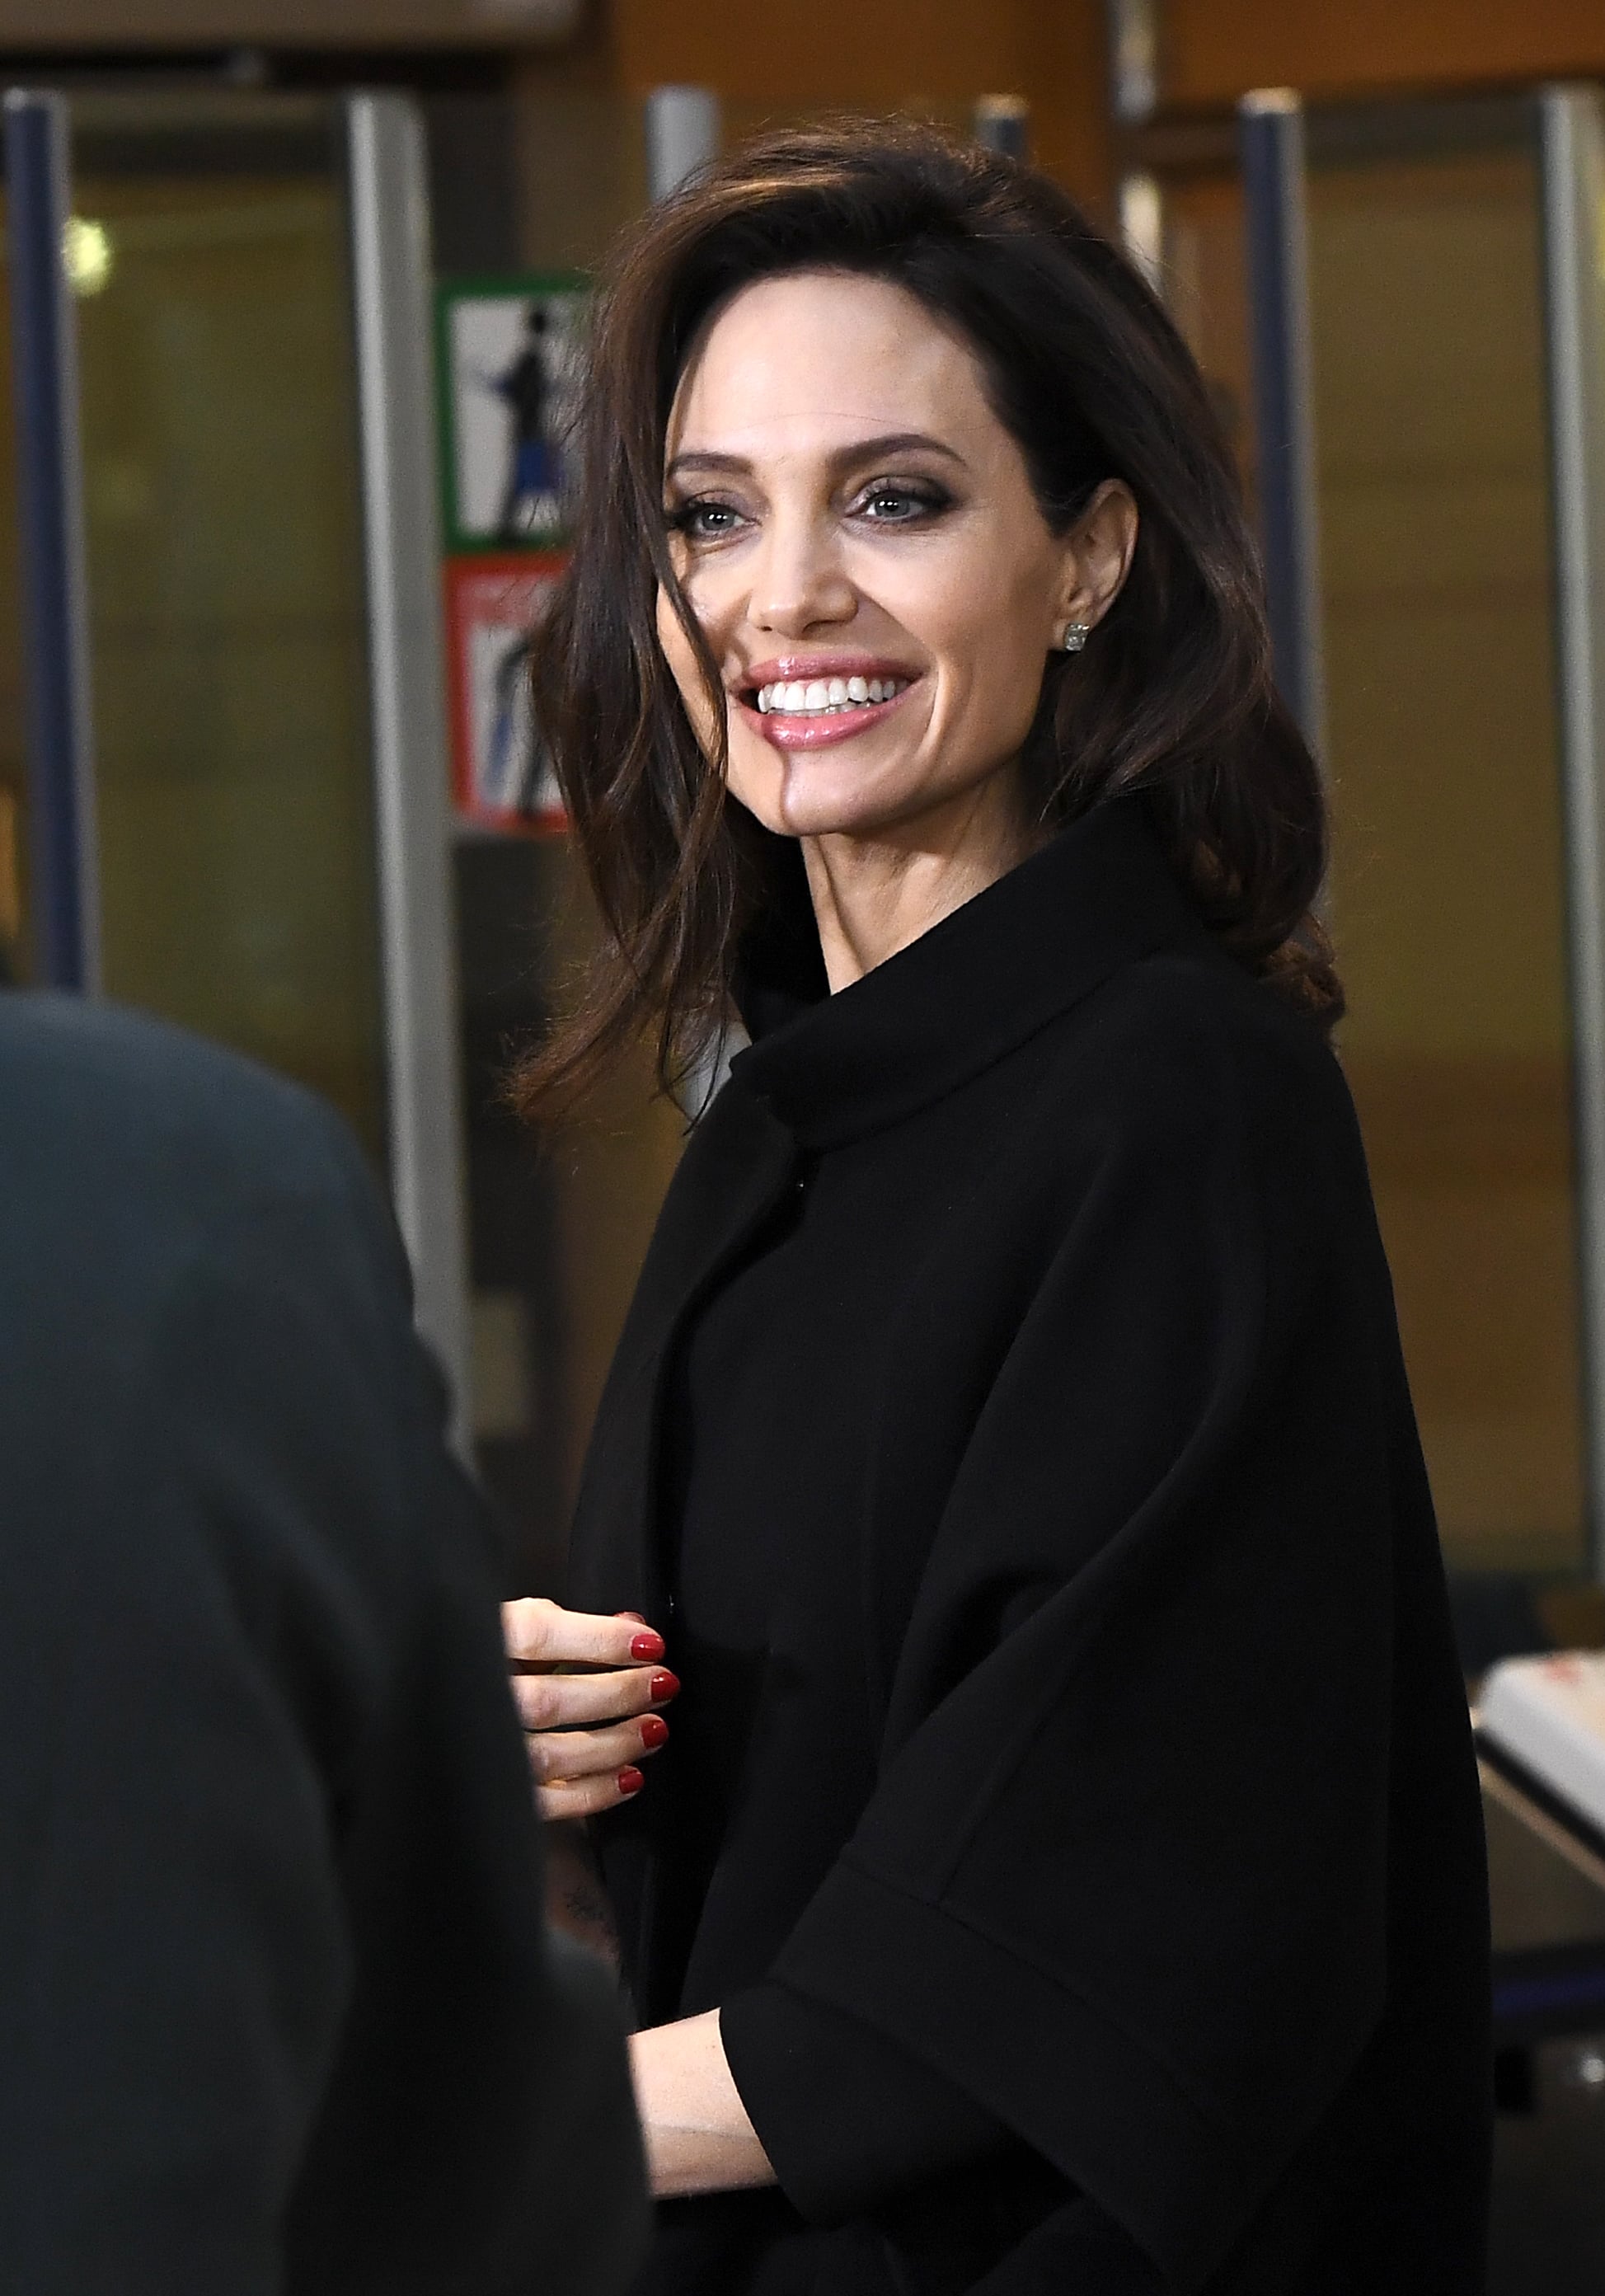 Angelina Jolie meets with French First Lady Brigitte Macron in